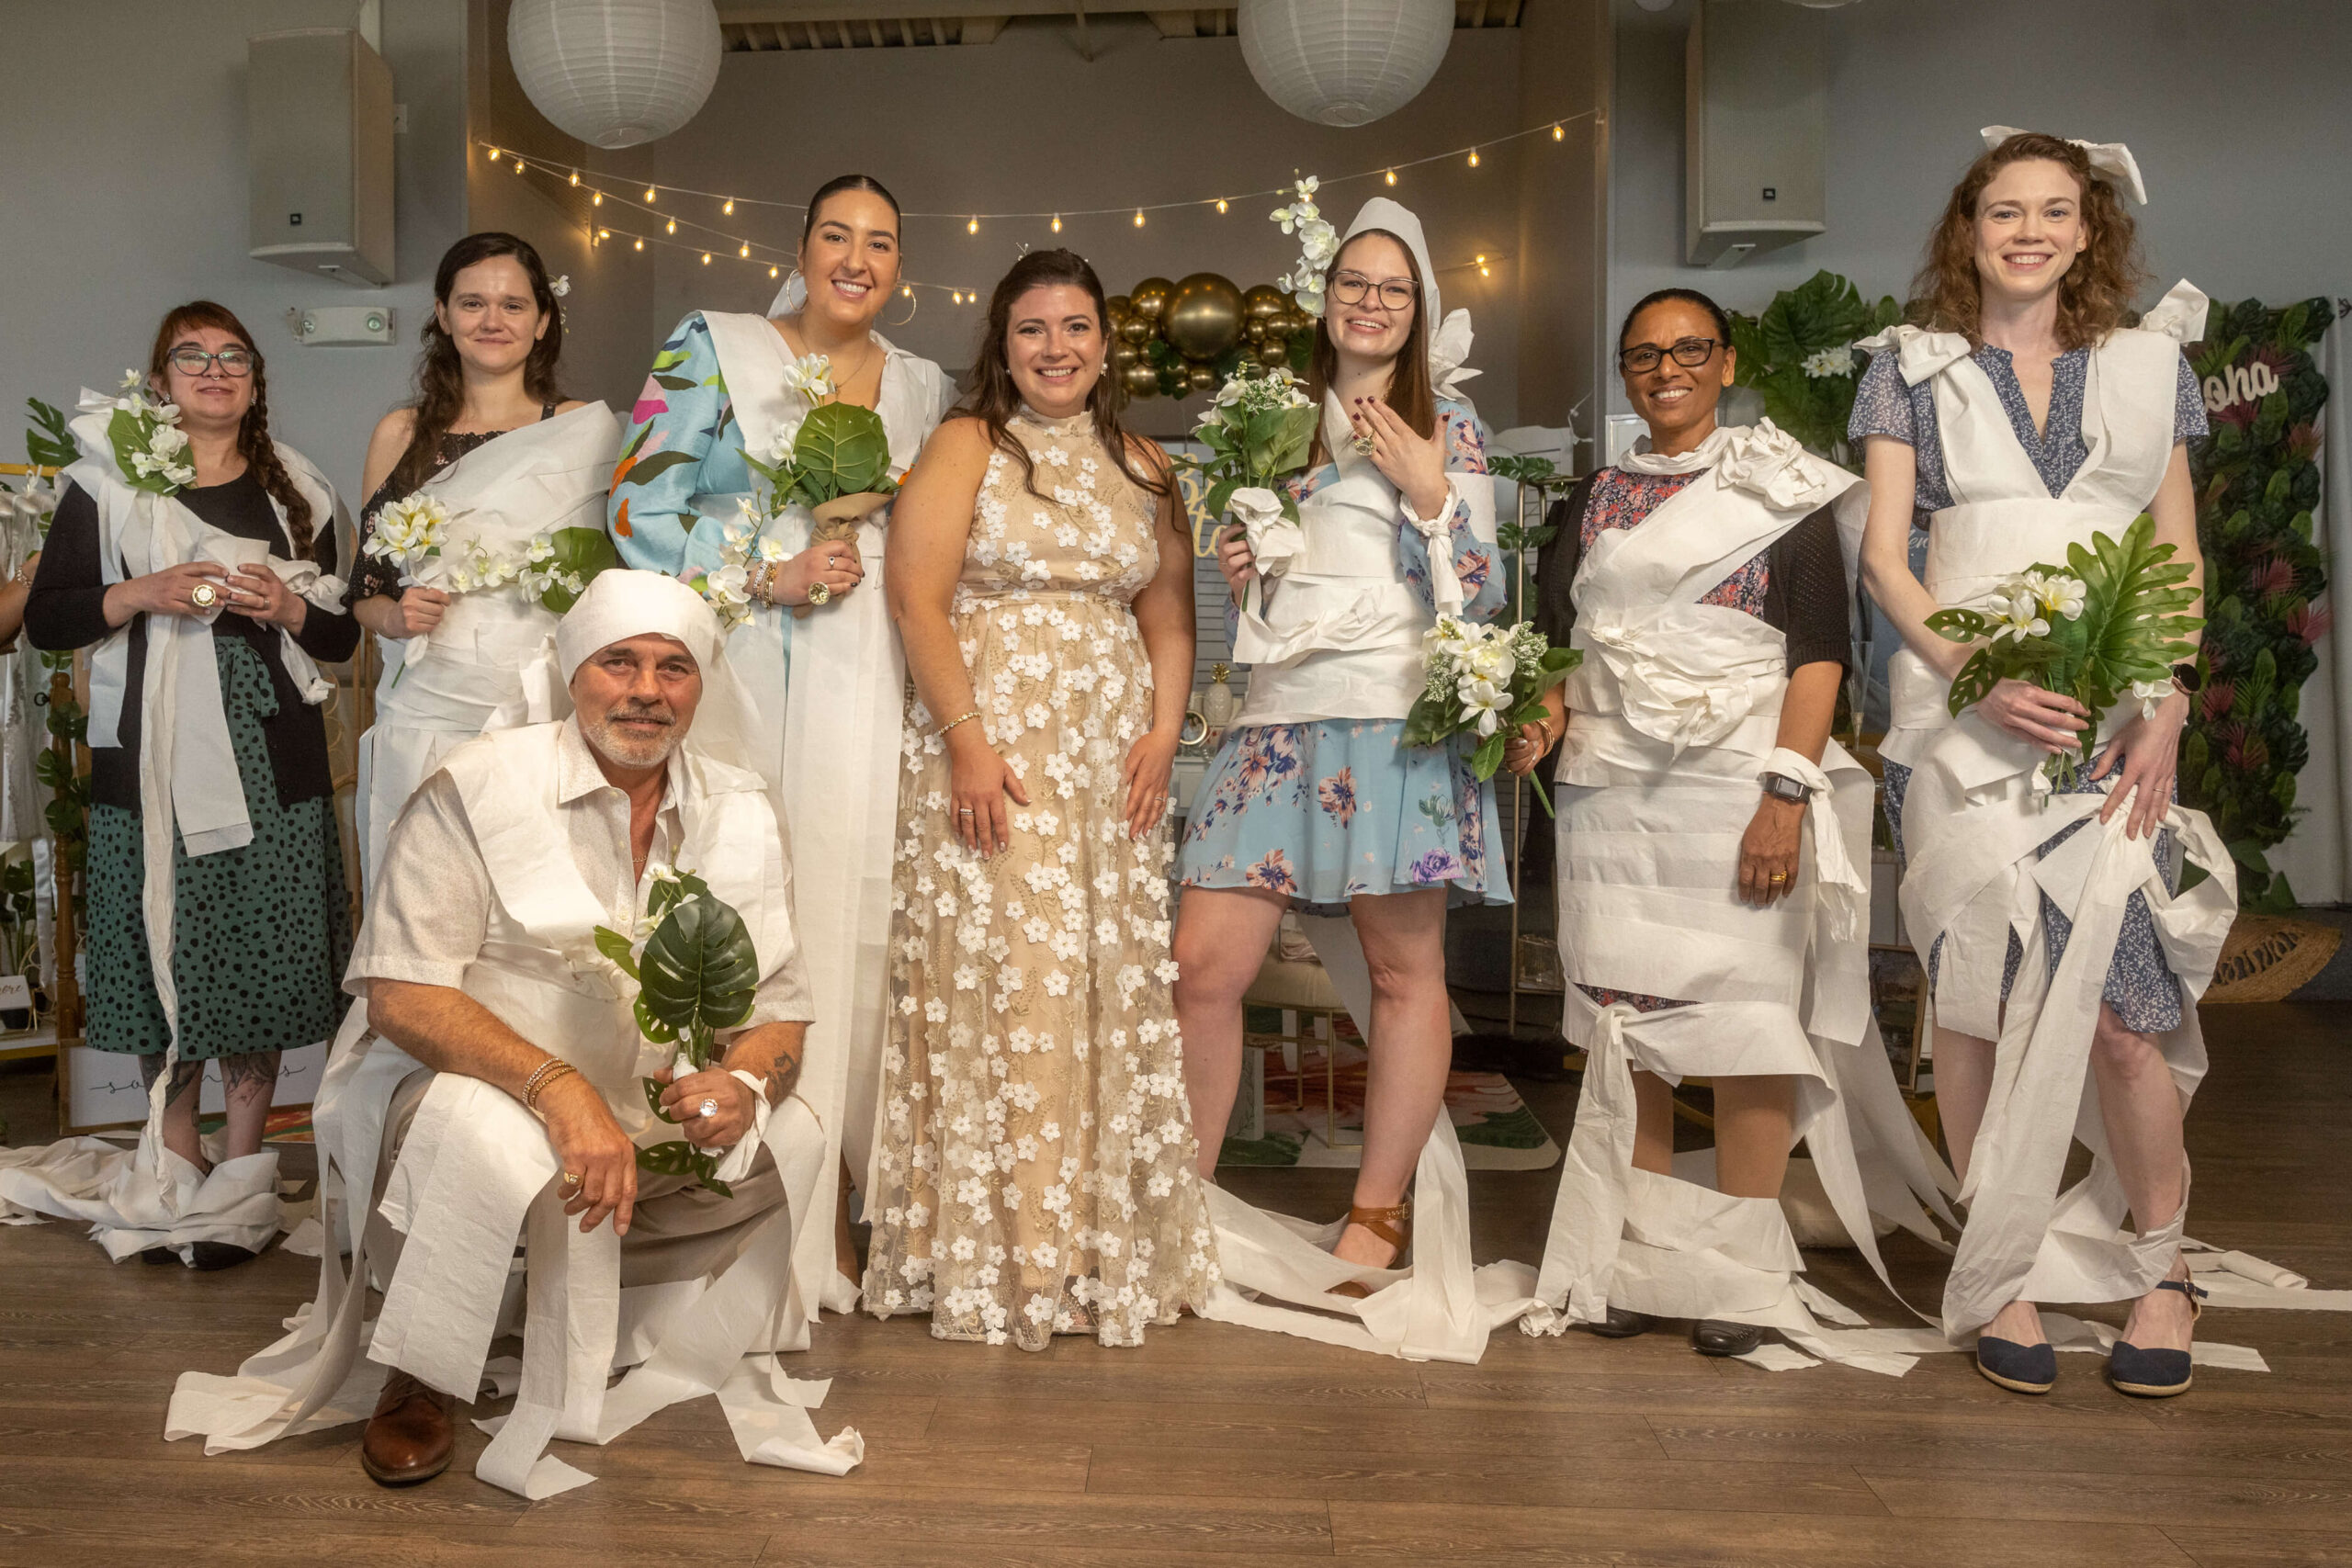 group photo of guests playing the toilet paper bridal shower game at tropical theme party